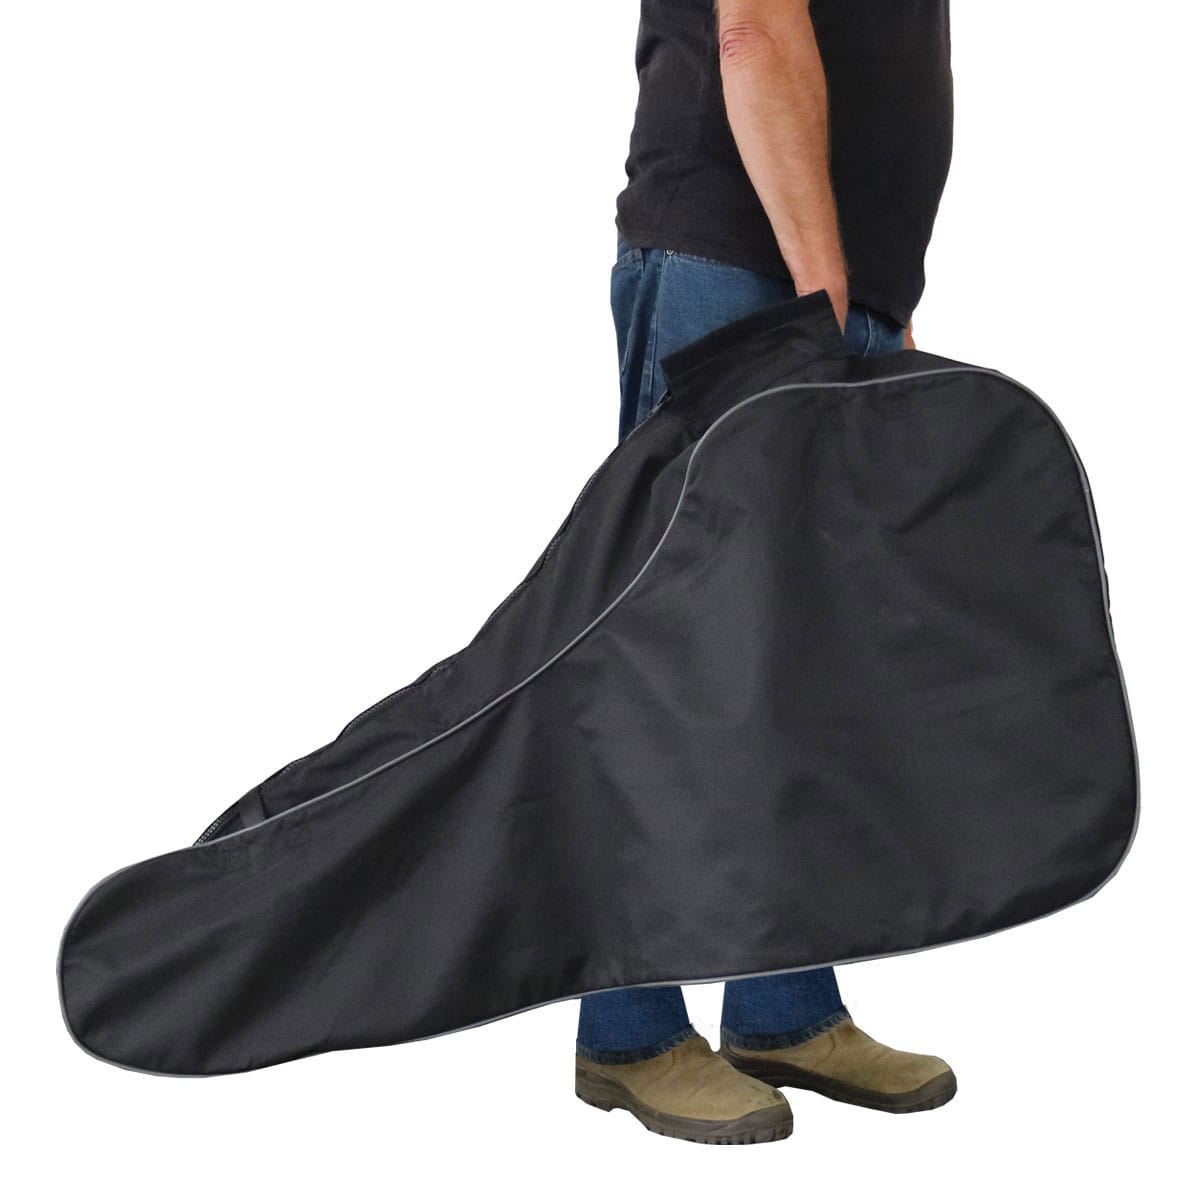 Outboard Motor Carry Bag - Protect and Transport Your Motor